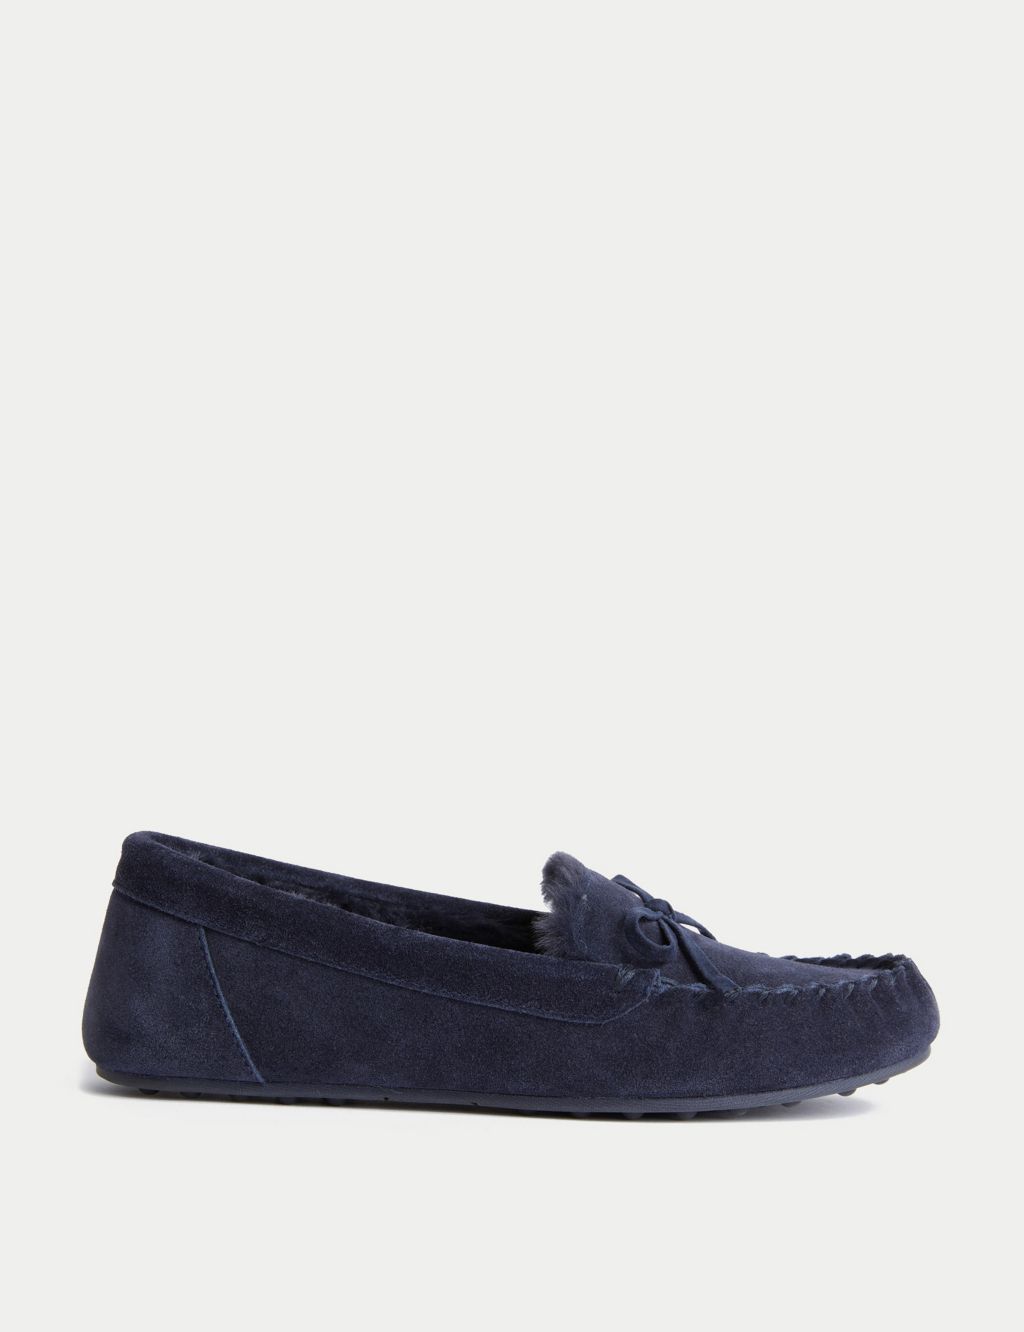 Suede Bow Faux Fur Lined Moccasin Slippers